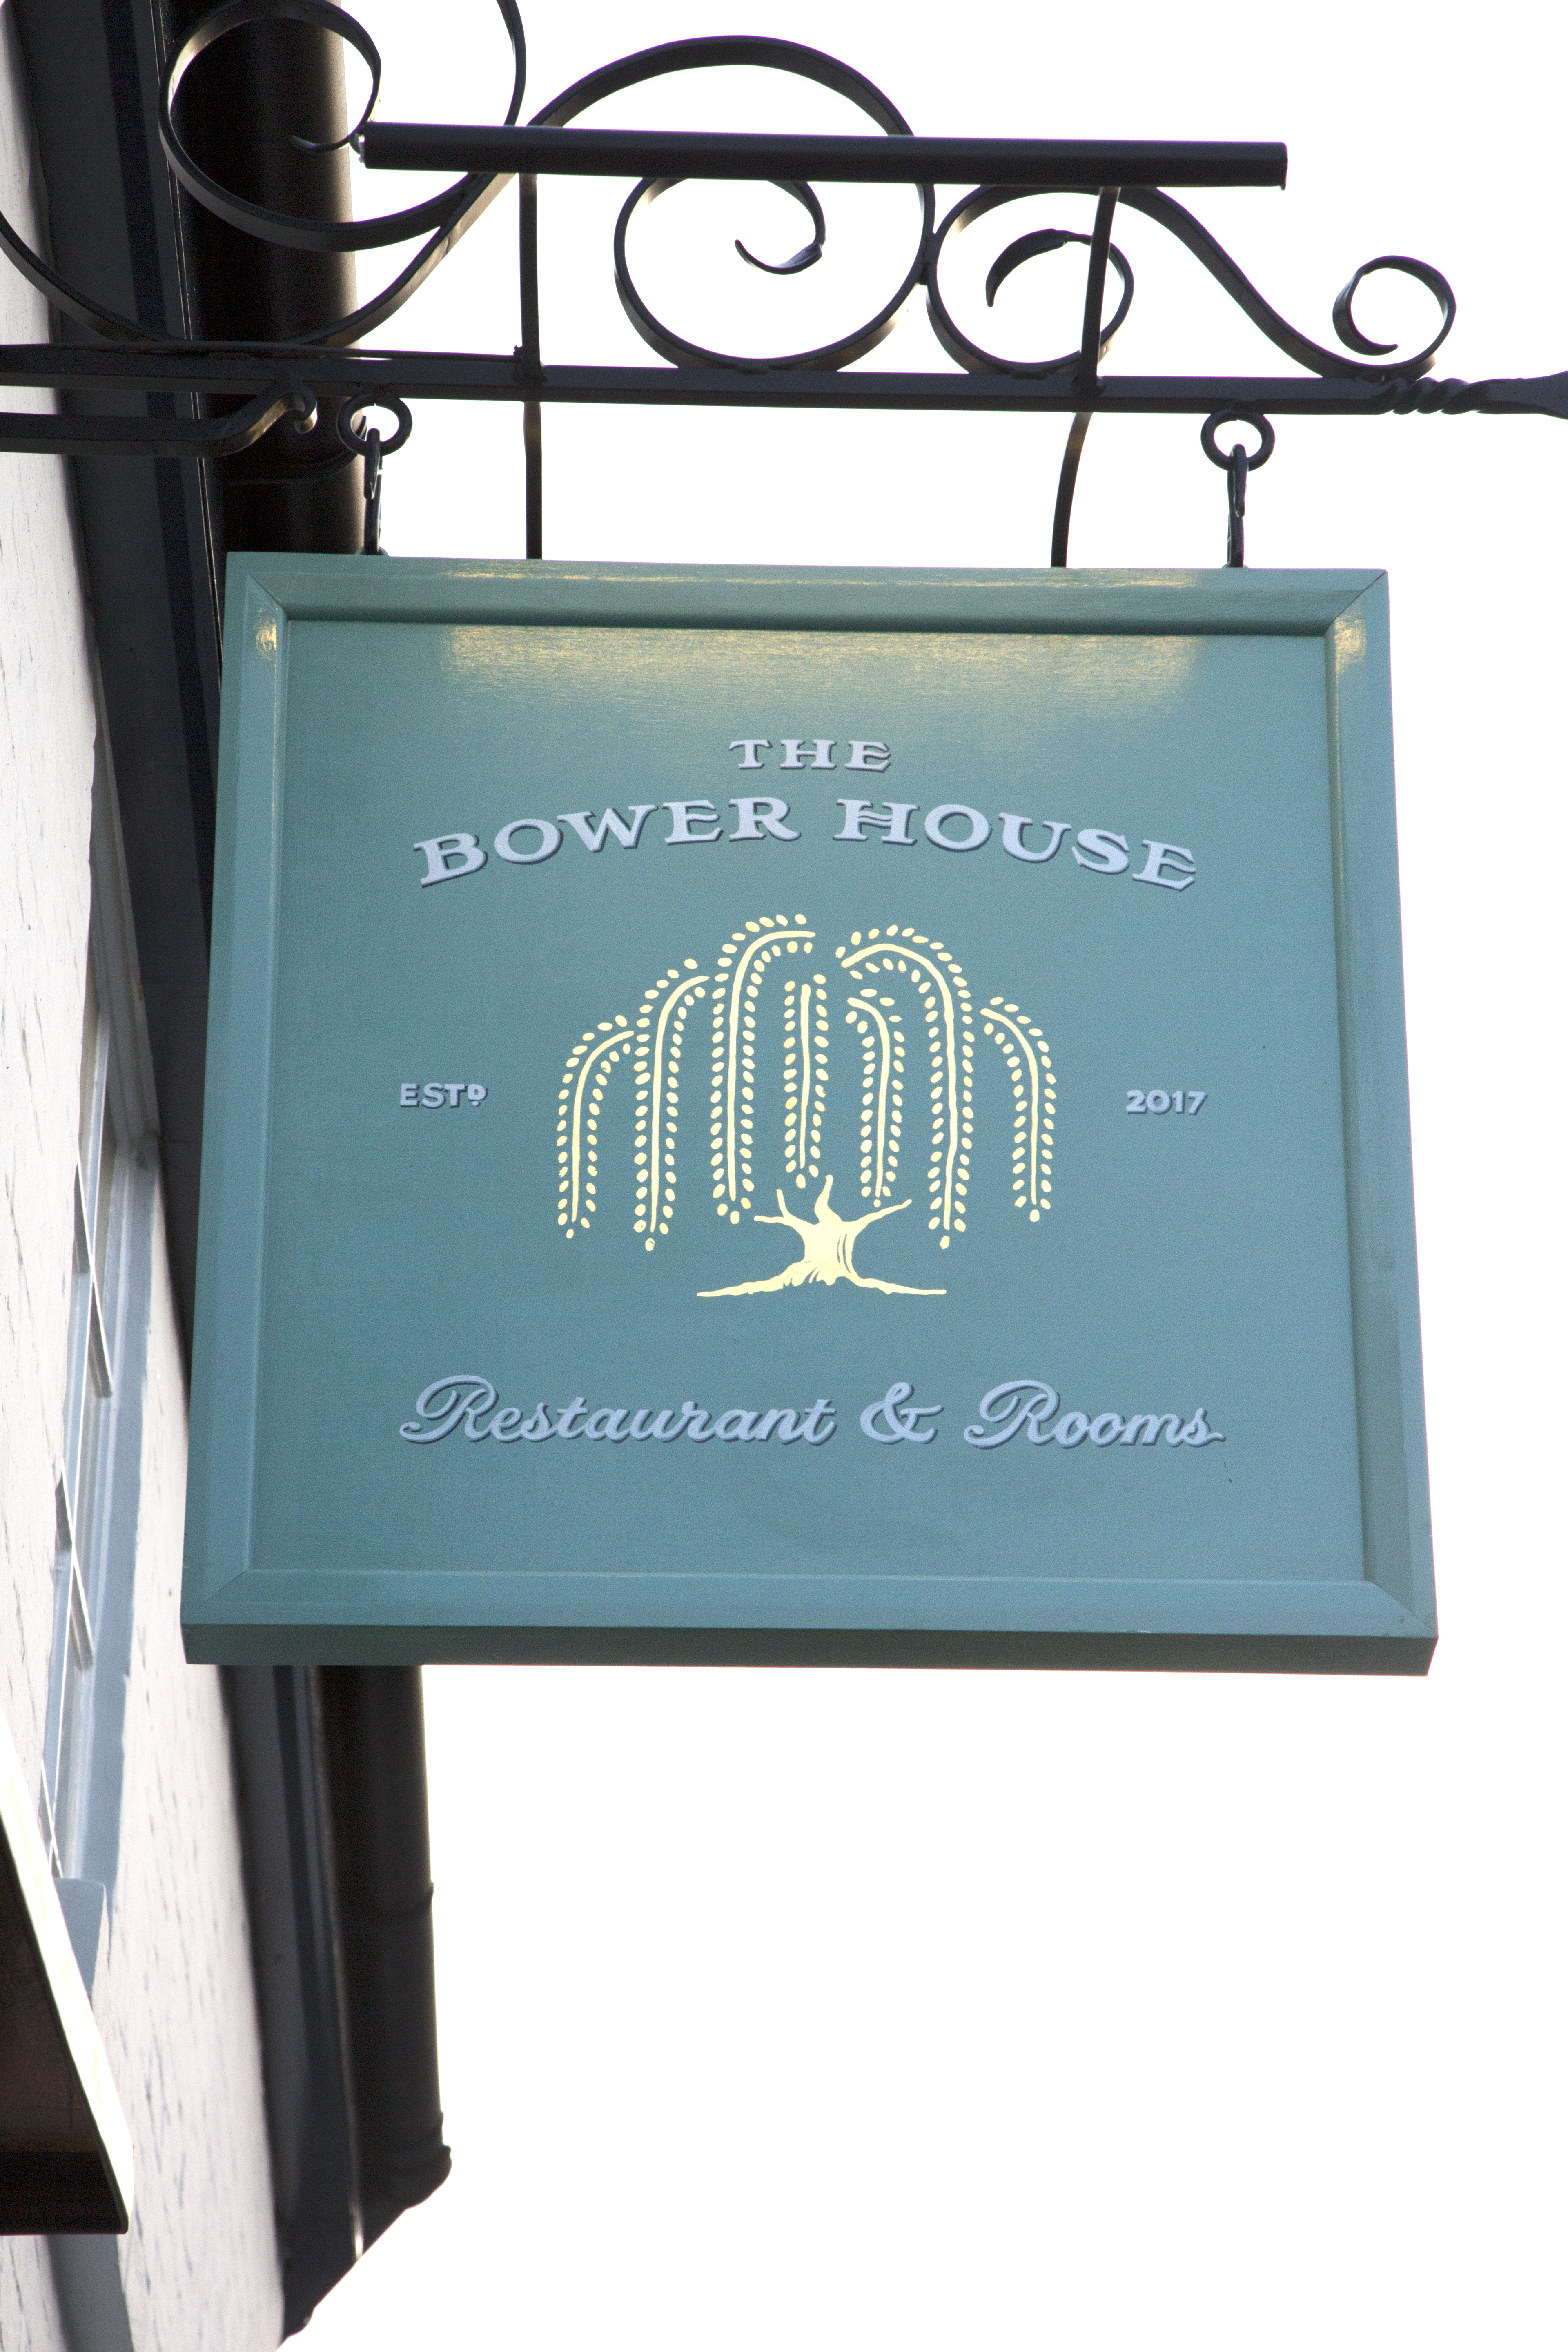 The Bower House, Restaurant and Rooms